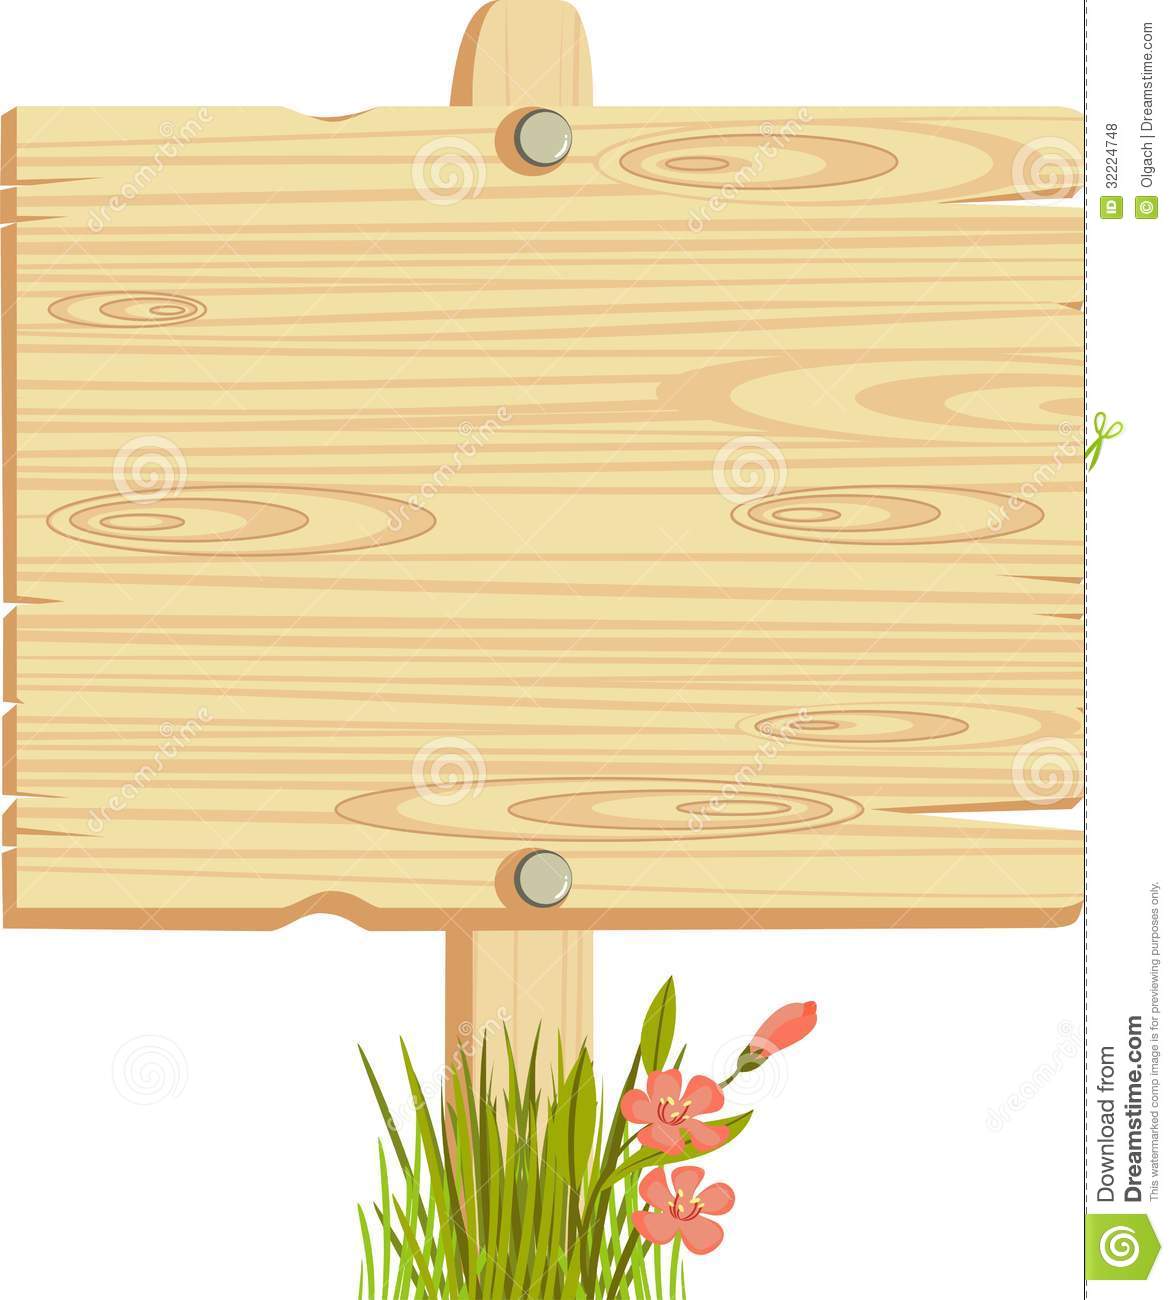 Wooden Blank Sign. Wooden Bla